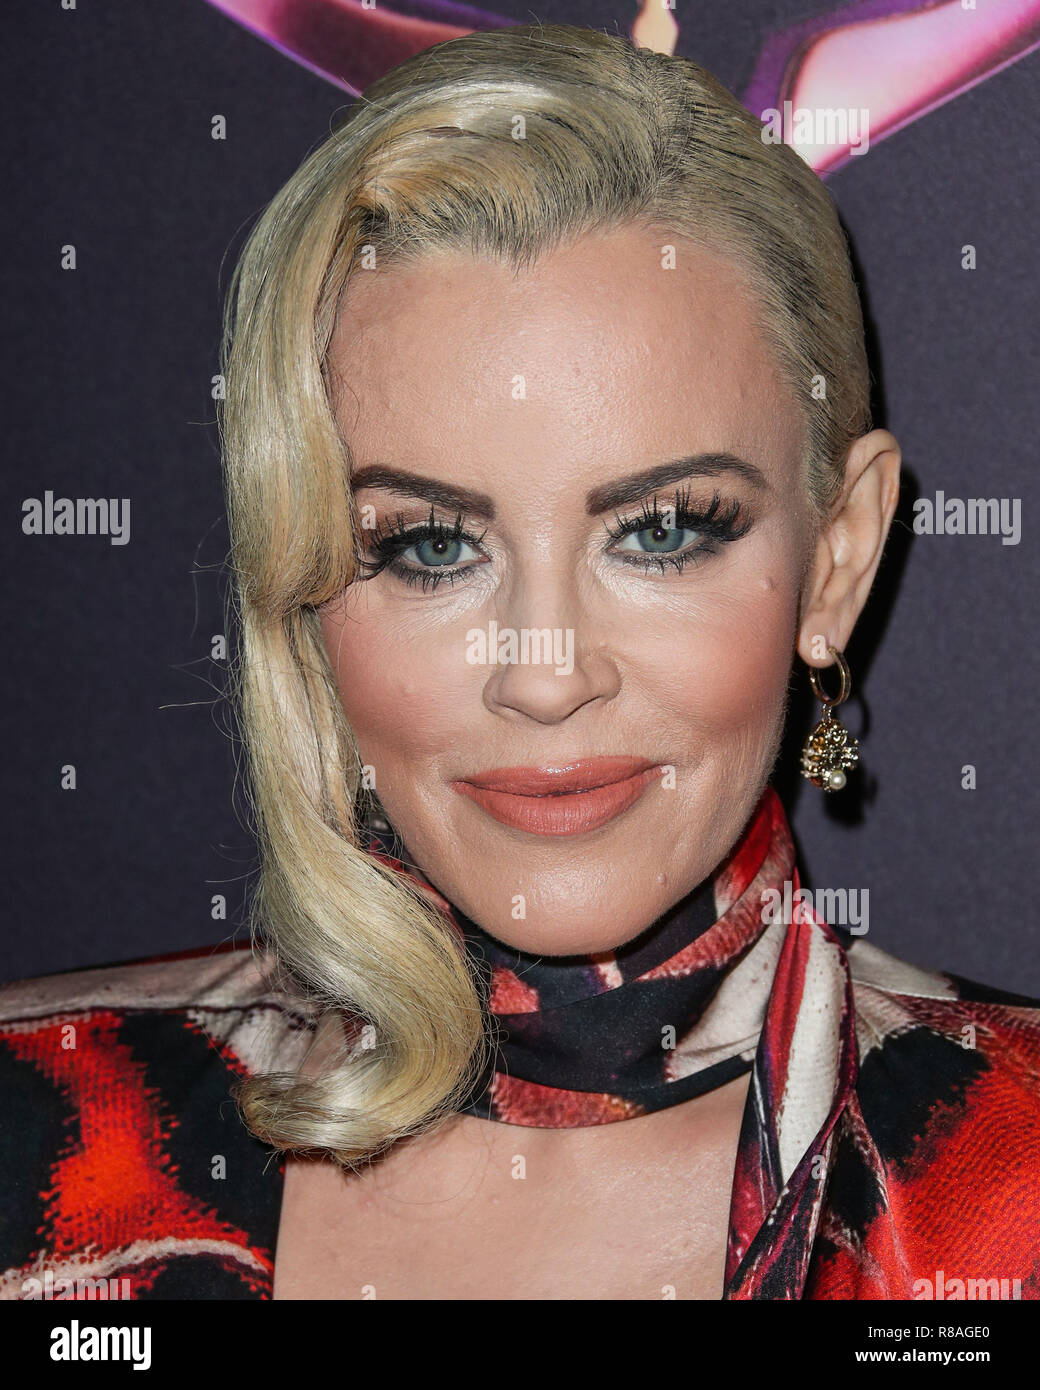 Hollywood, California, USA. 13th December, 2018. Jenny McCarthy arrives at Fox's 'The Masked Singer' Premiere Karaoke Event held at The Peppermint Club on December 13, 2018 in Los Angeles, California, United States. (Photo by Xavier Collin/Image Press Agency) Credit: Image Press Agency/Alamy Live News Stock Photo